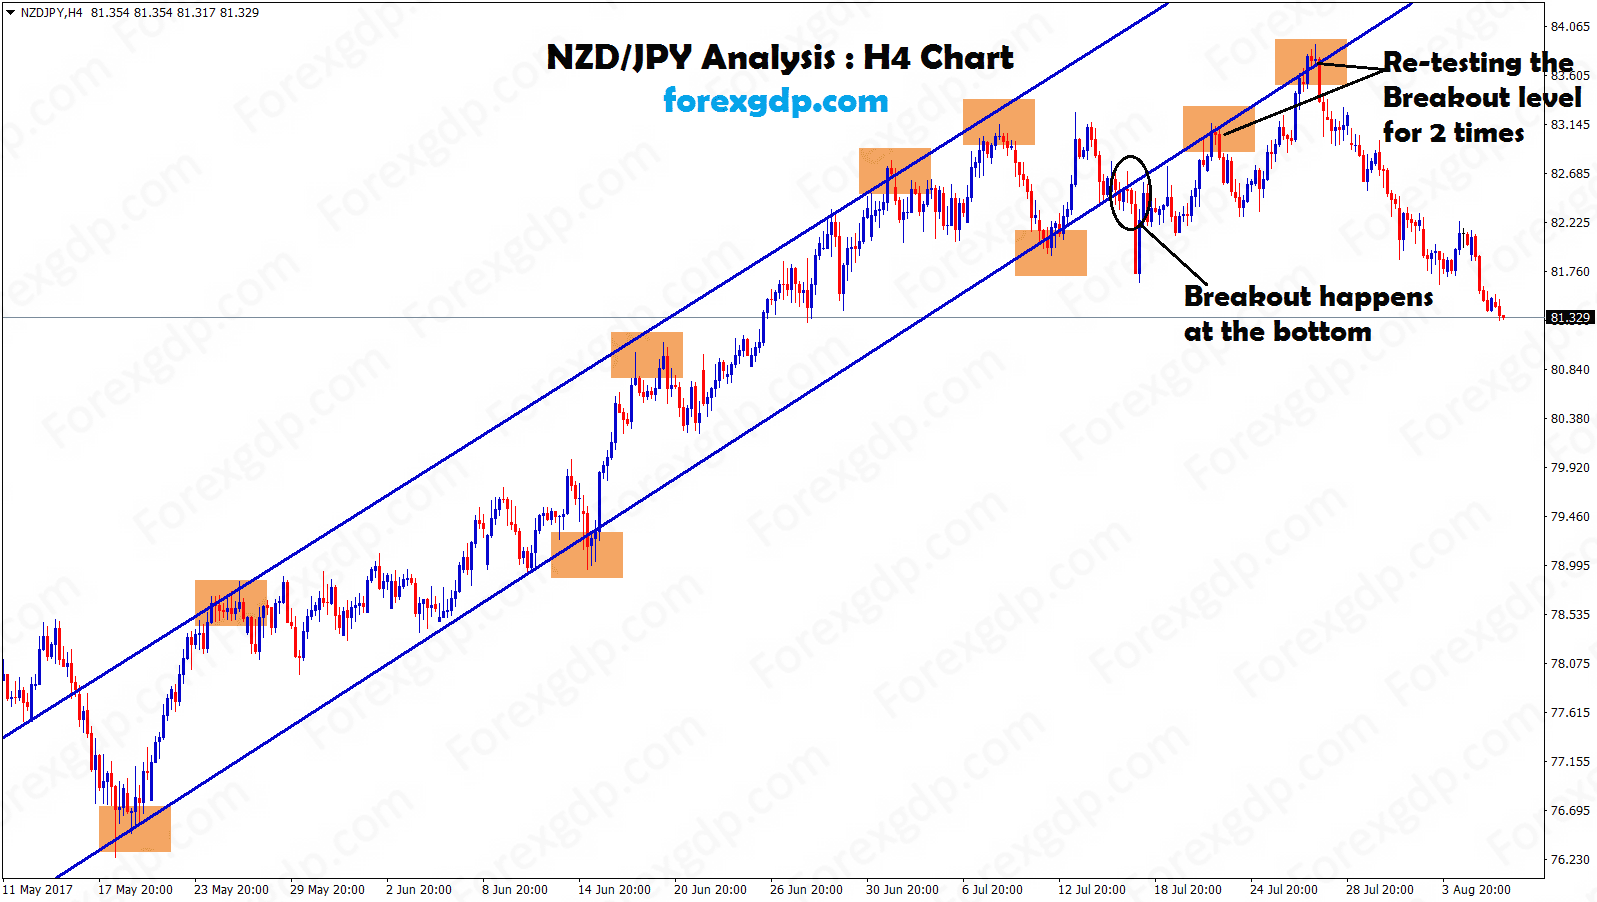 NZDJPY breakout happened at the bottom level, but retested the breakout level for two times